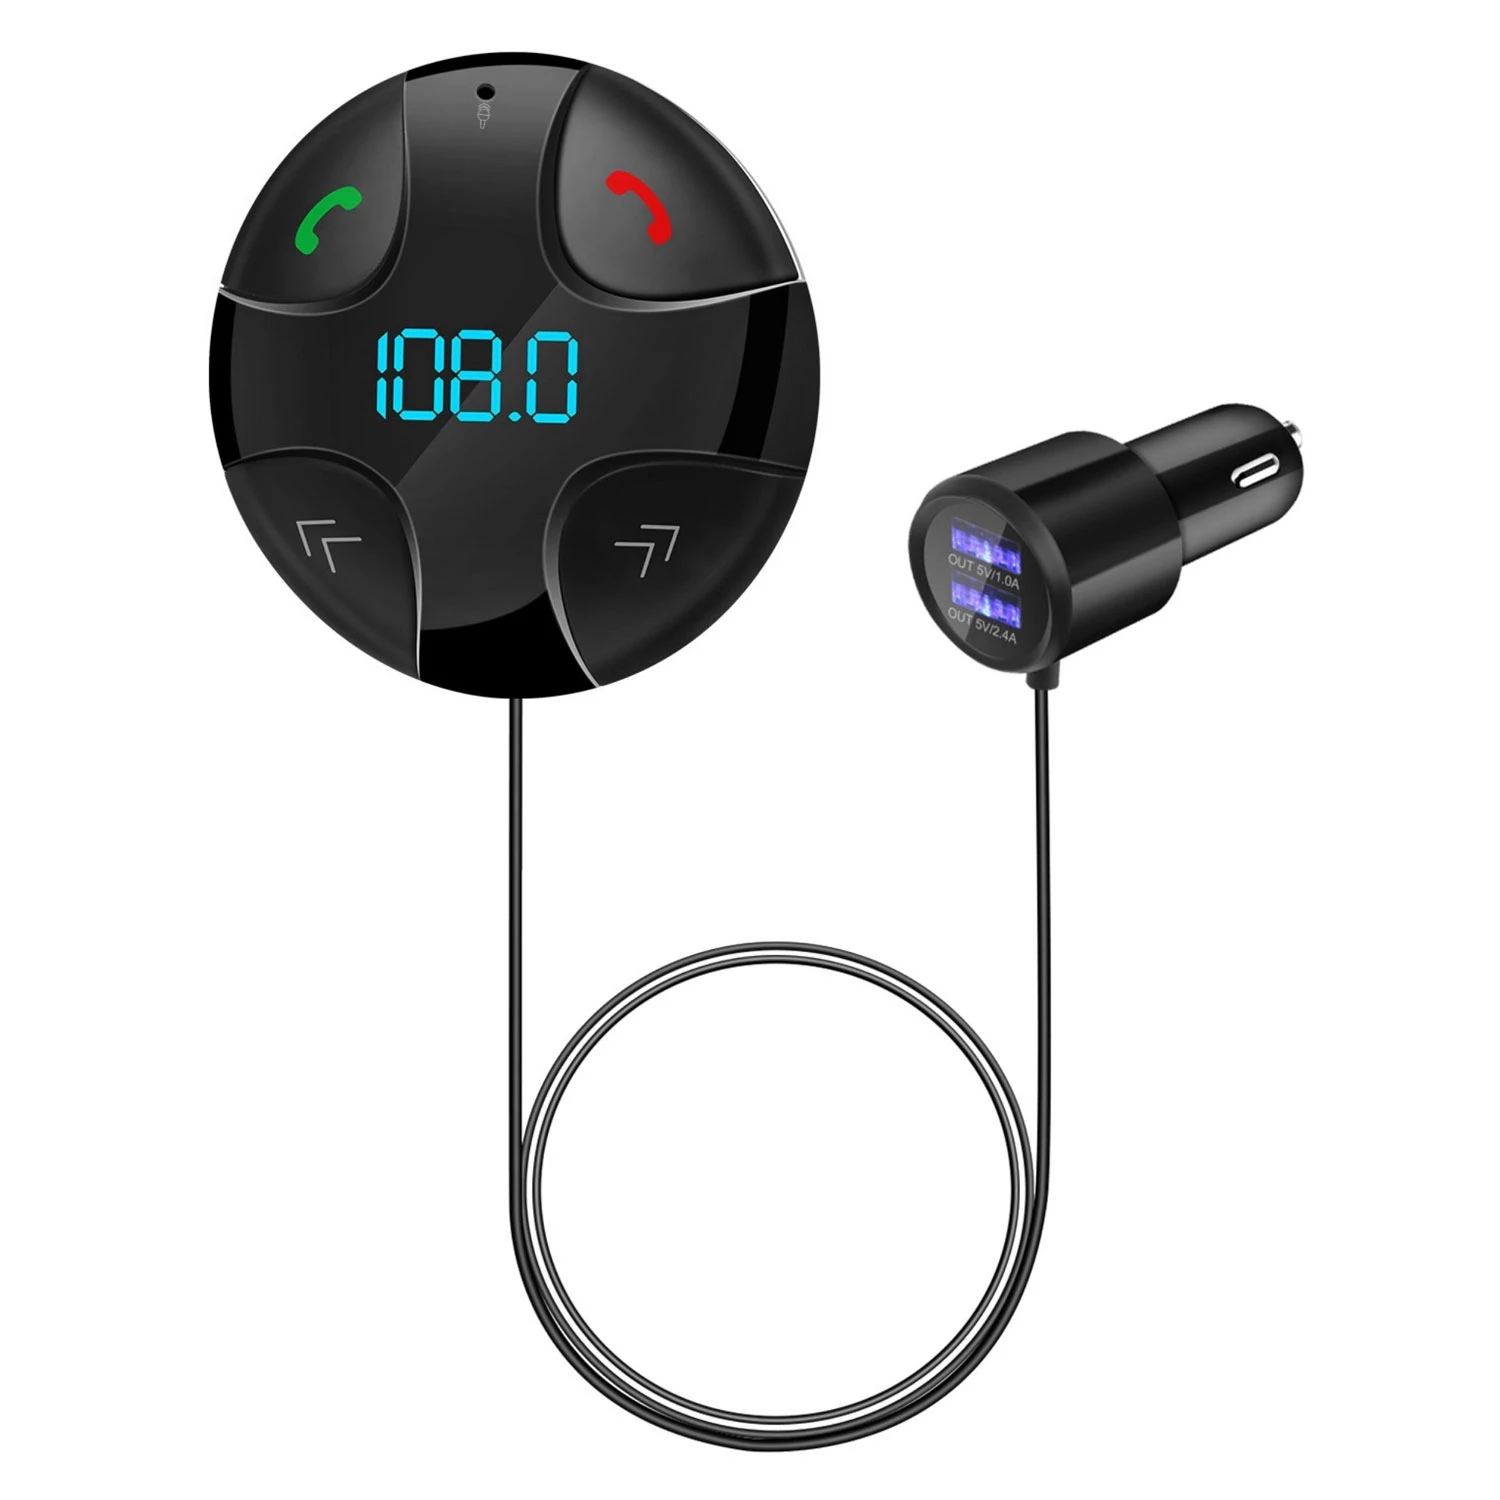 Wireless FM Transmitter V4.2 MP3 Player 3.4A Dual USB Charge Hands-free TF Card LED Display for Car 